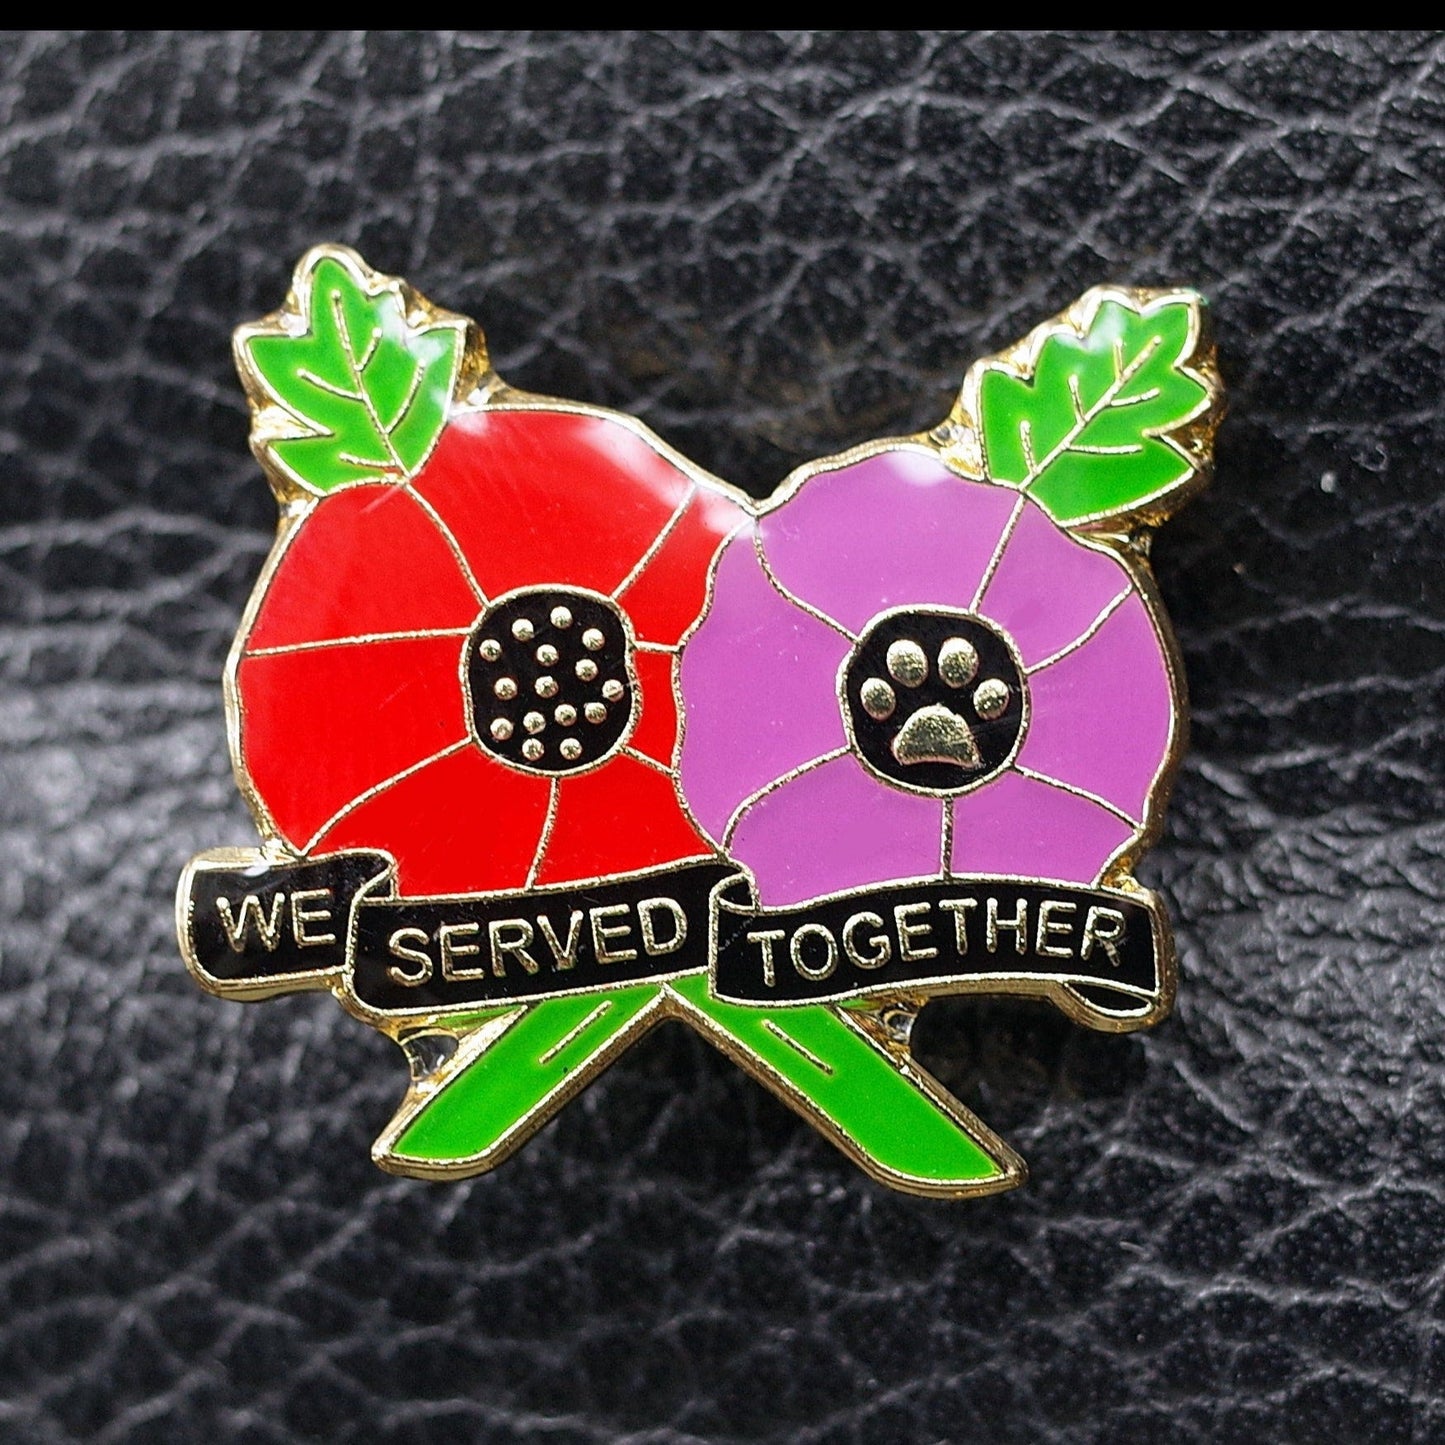 We Served Together - Red and Purple Pin Badge